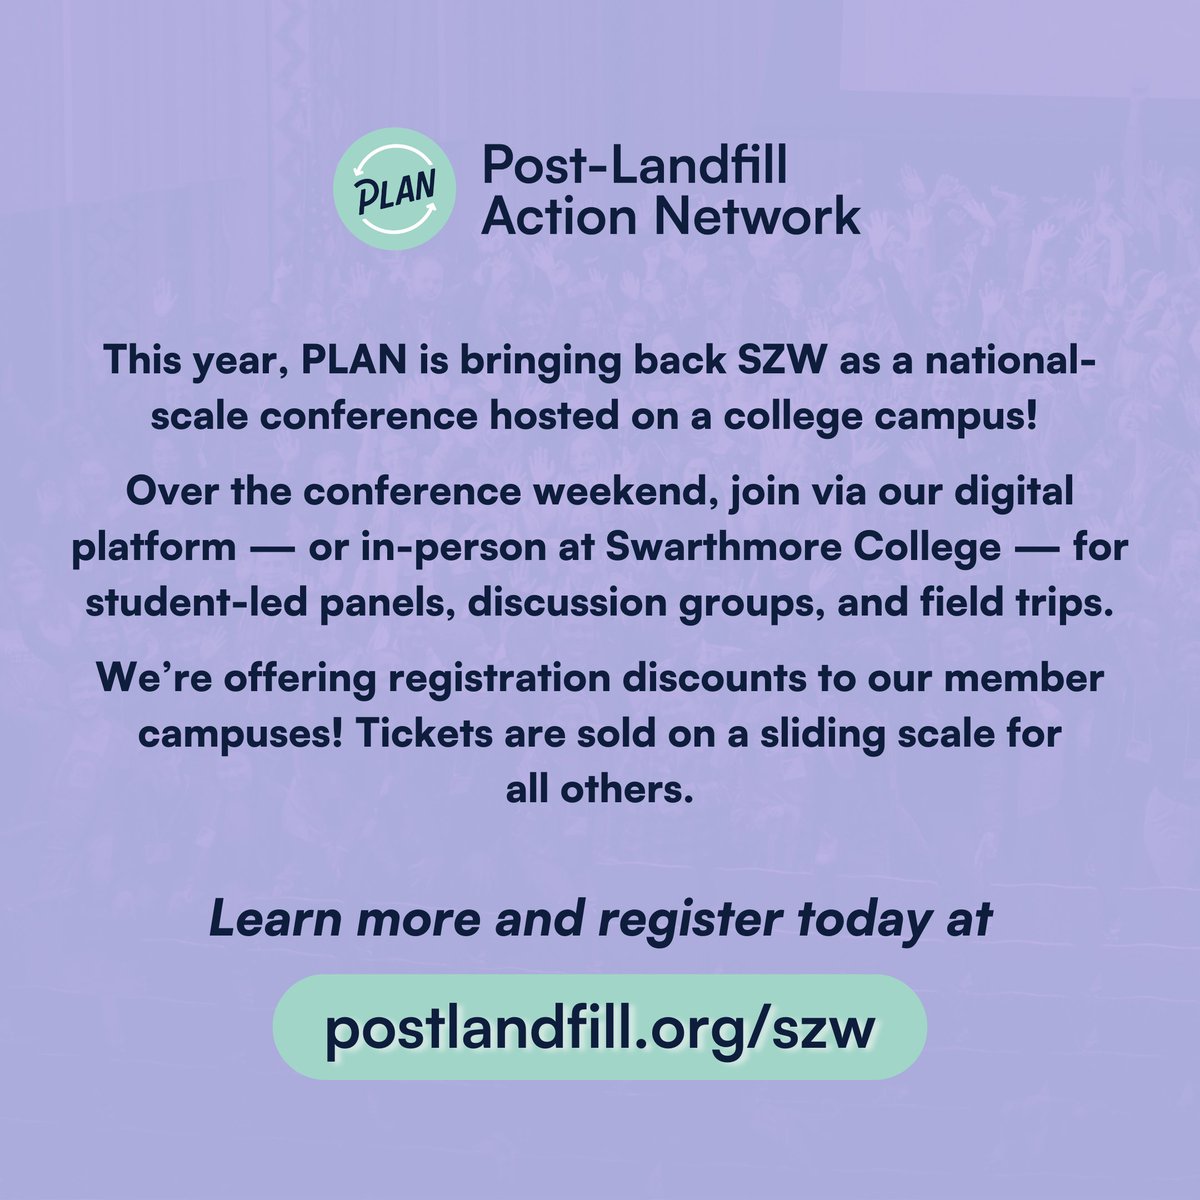 The Students for Zero Waste Conference taking place in a hybrid format November 10-12! Join @postlandfill for panels, workshops, and field trips with students and organizers across the country. #SZW23